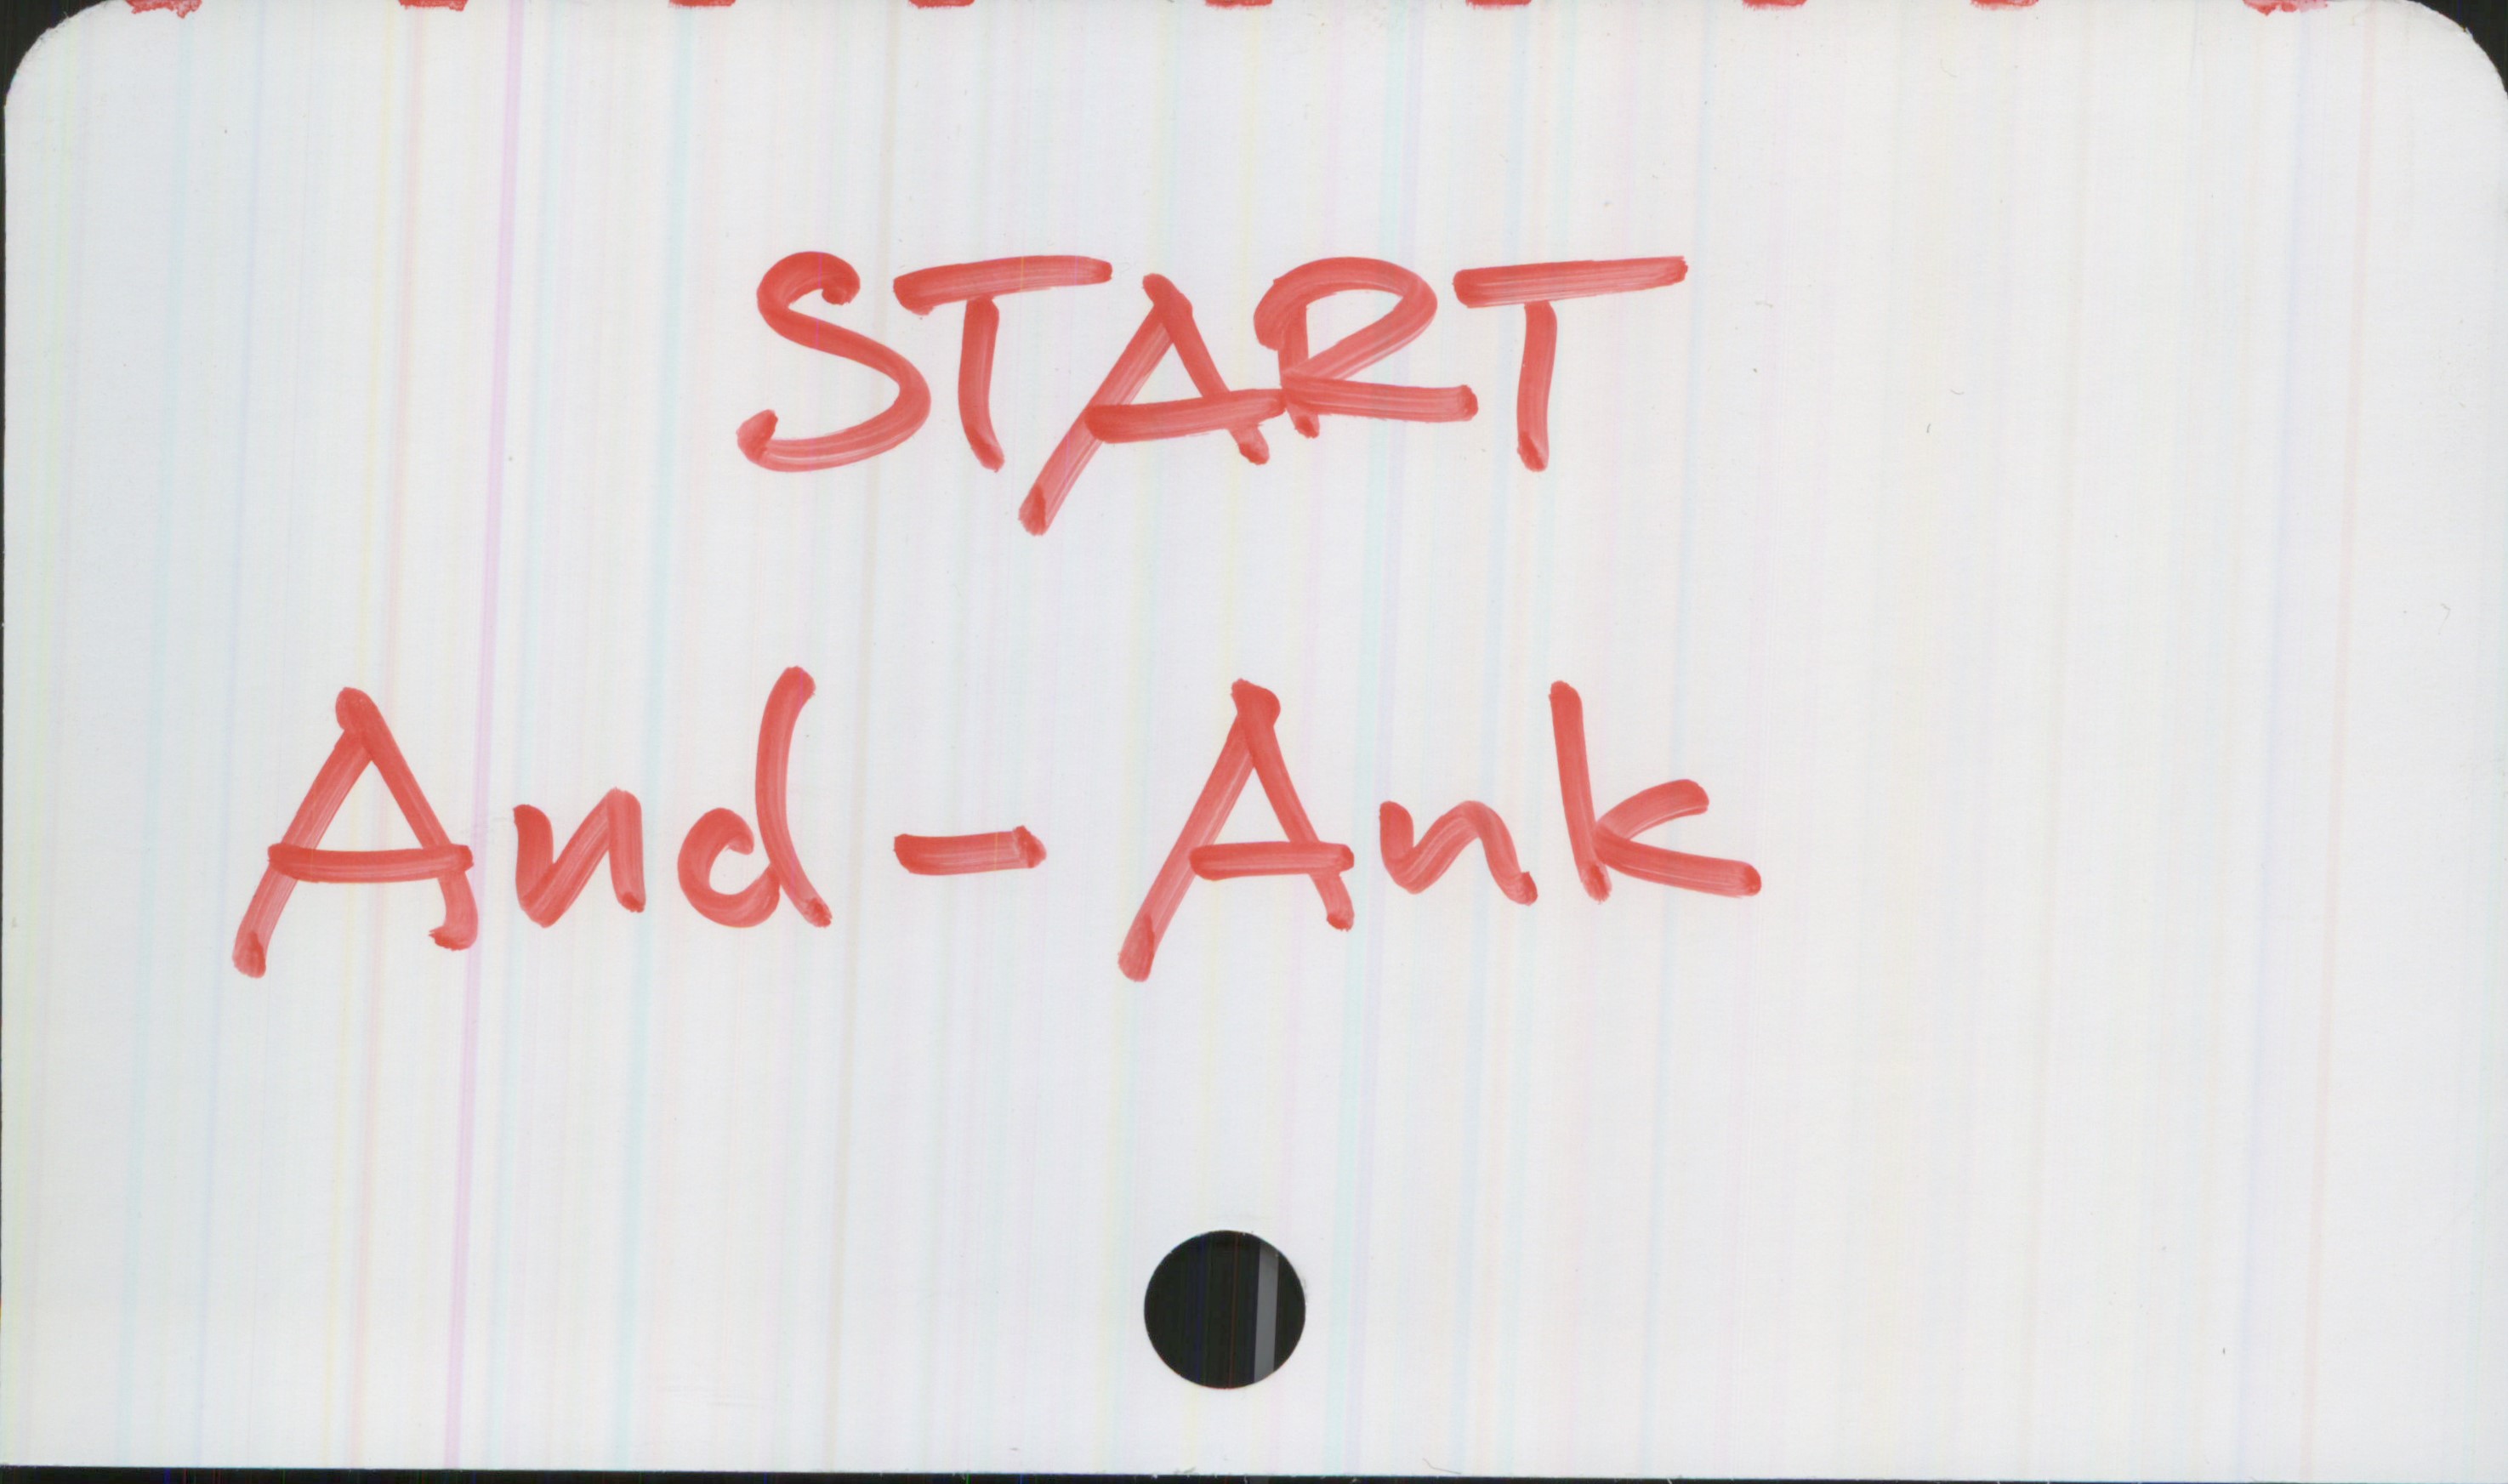 And-Ank START
And-Ank